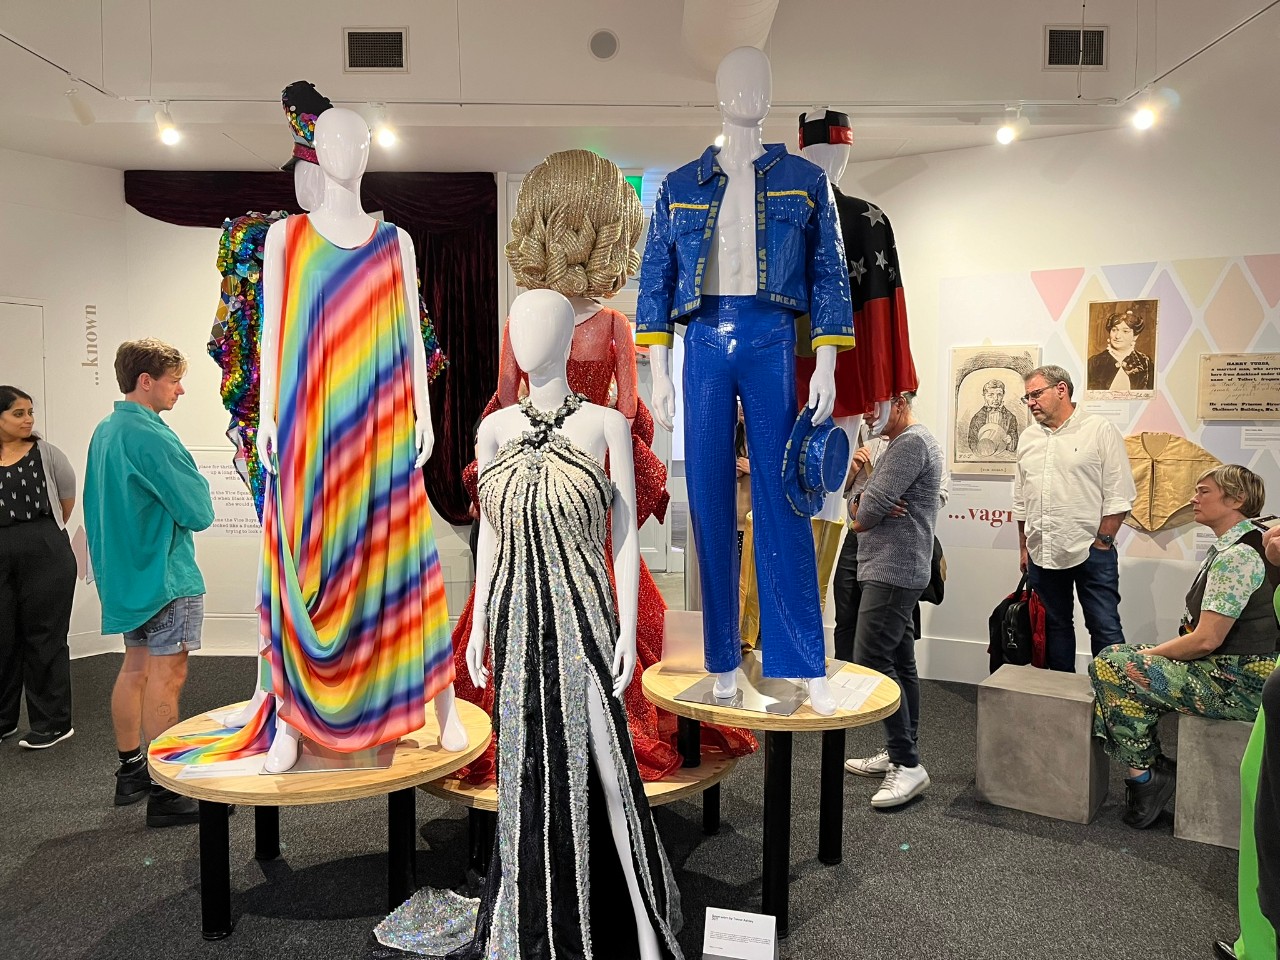 A photograph of an exhibition featuring 6 mannequins in brightly coloured and sequinned drag costumes. Of the three which facing the camera, are the one on the left is wearing a loose fitting rainbow dress, the one in the middle is wearing a black and white sequinned evening gown, and the one on the right is wearing a blue jacket and pants made out of IKEA bags. People are standing around the display looking at it and other things in the room.